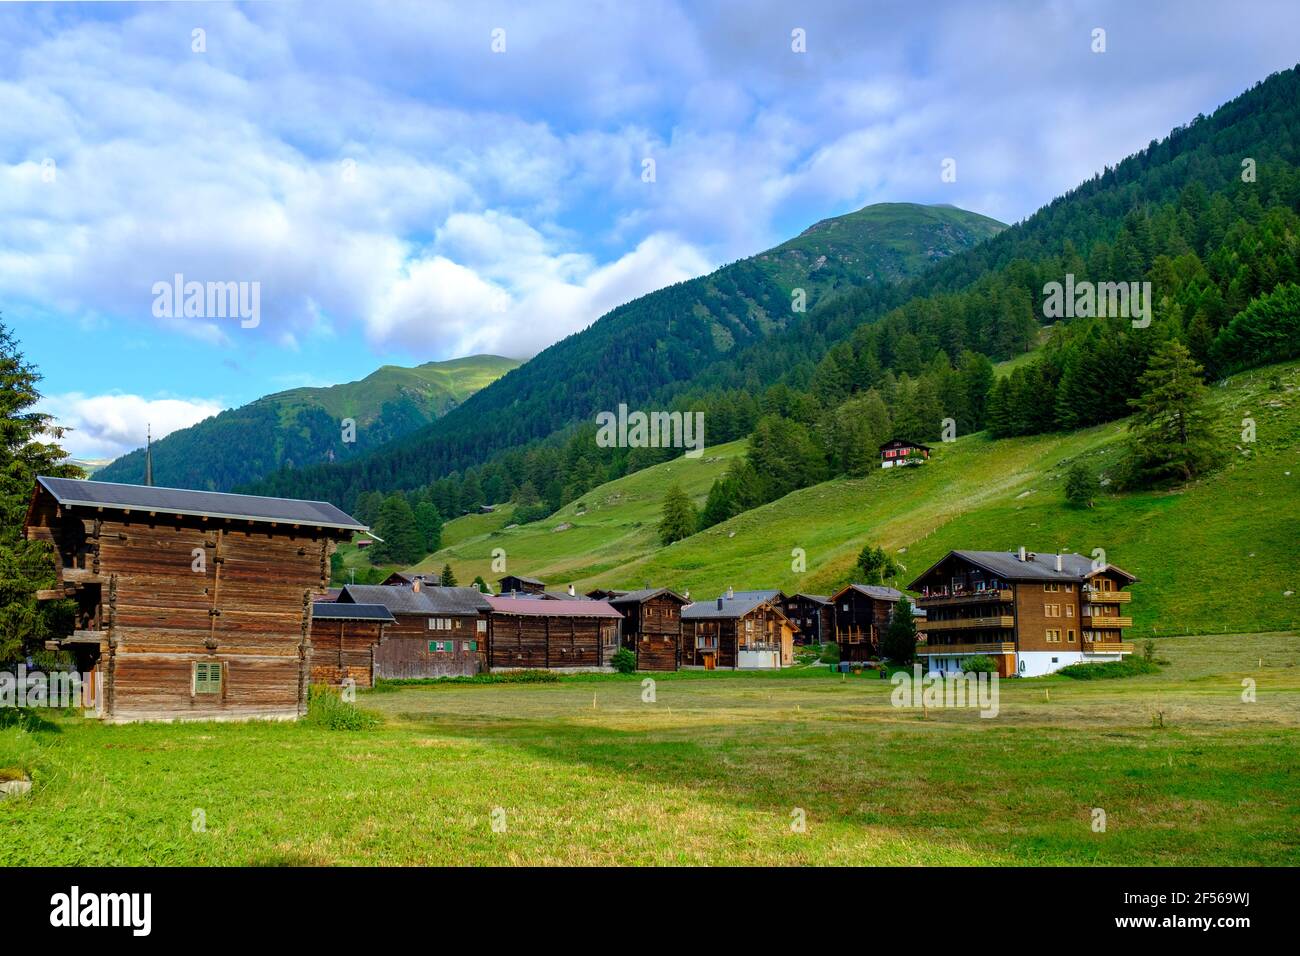 Switzerland, Valais, Ulrichen, Traditional wooden houses in summer mountain scenery Stock Photo